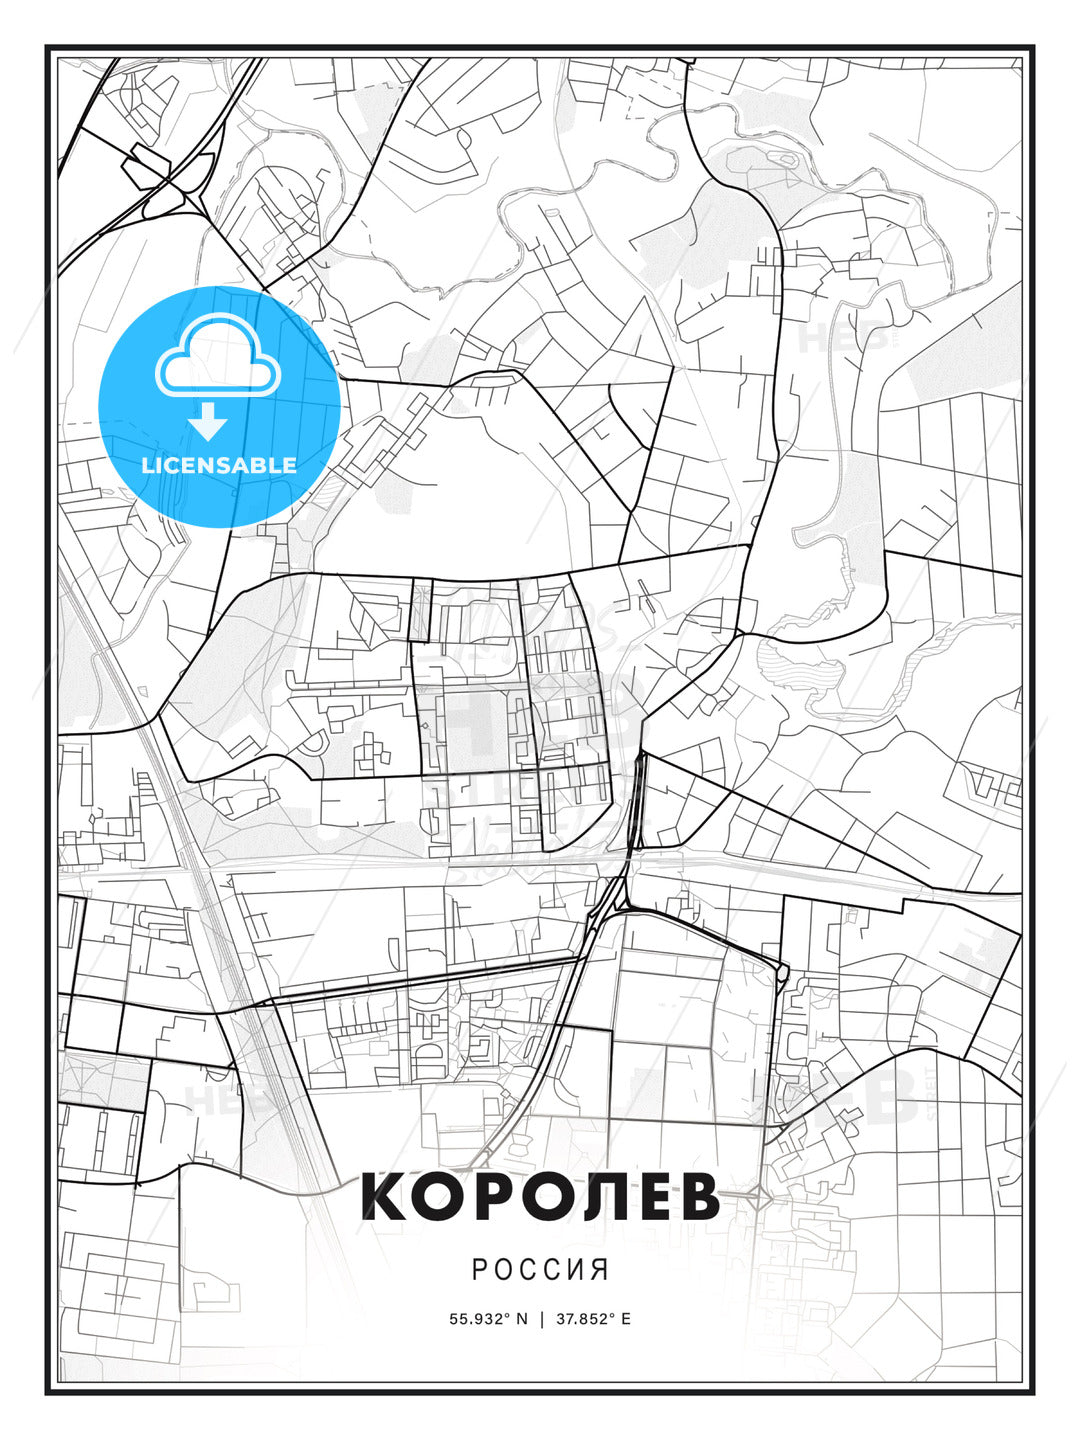 КОРОЛЕВ / Korolyov, Russia, Modern Print Template in Various Formats - HEBSTREITS Sketches